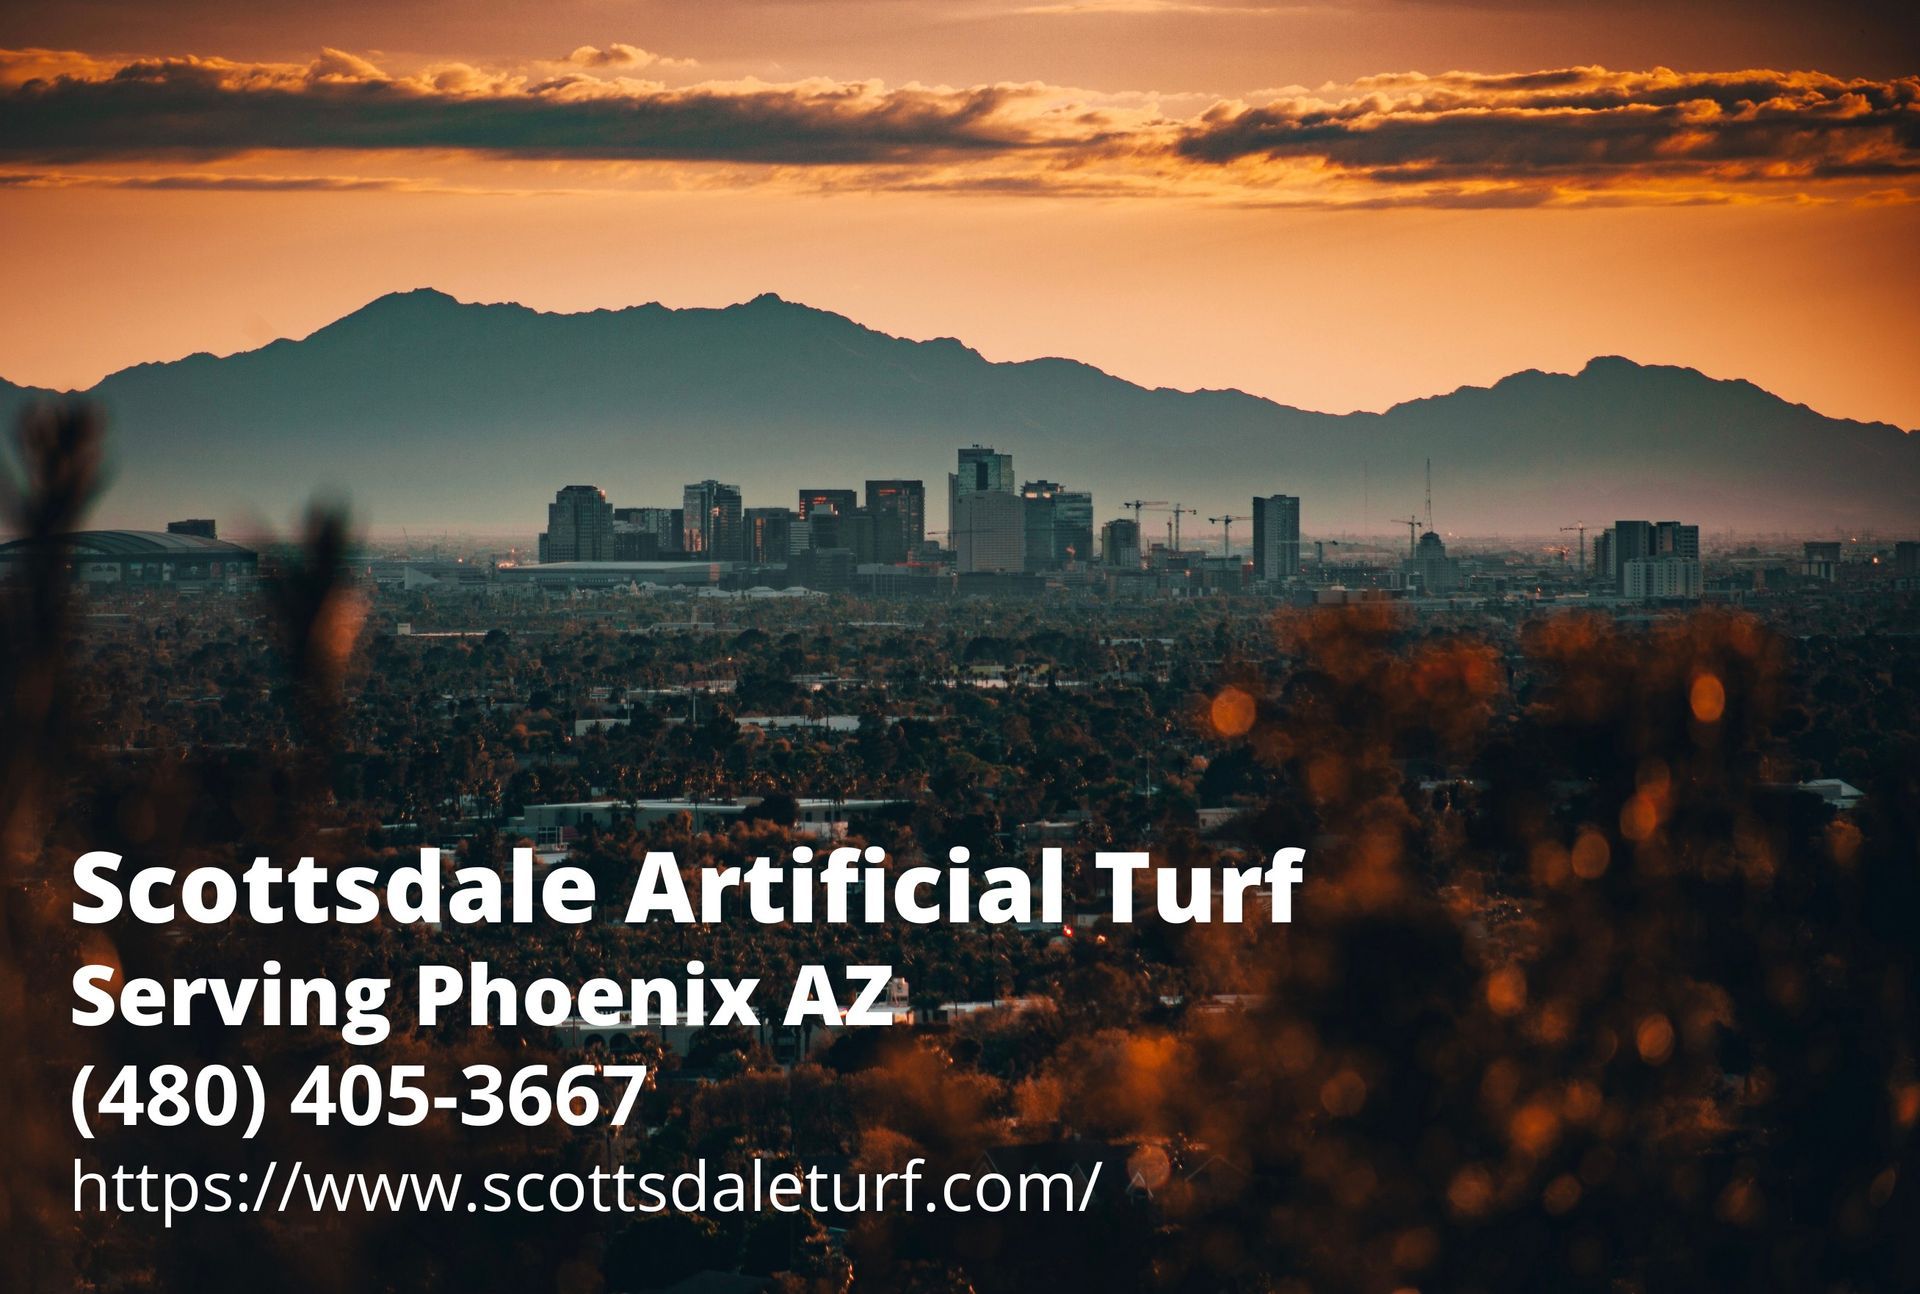 golden hour in Phoenix with business details of Scottsdale Artificial Turf - an artificial grass company serving Phoenix AZ